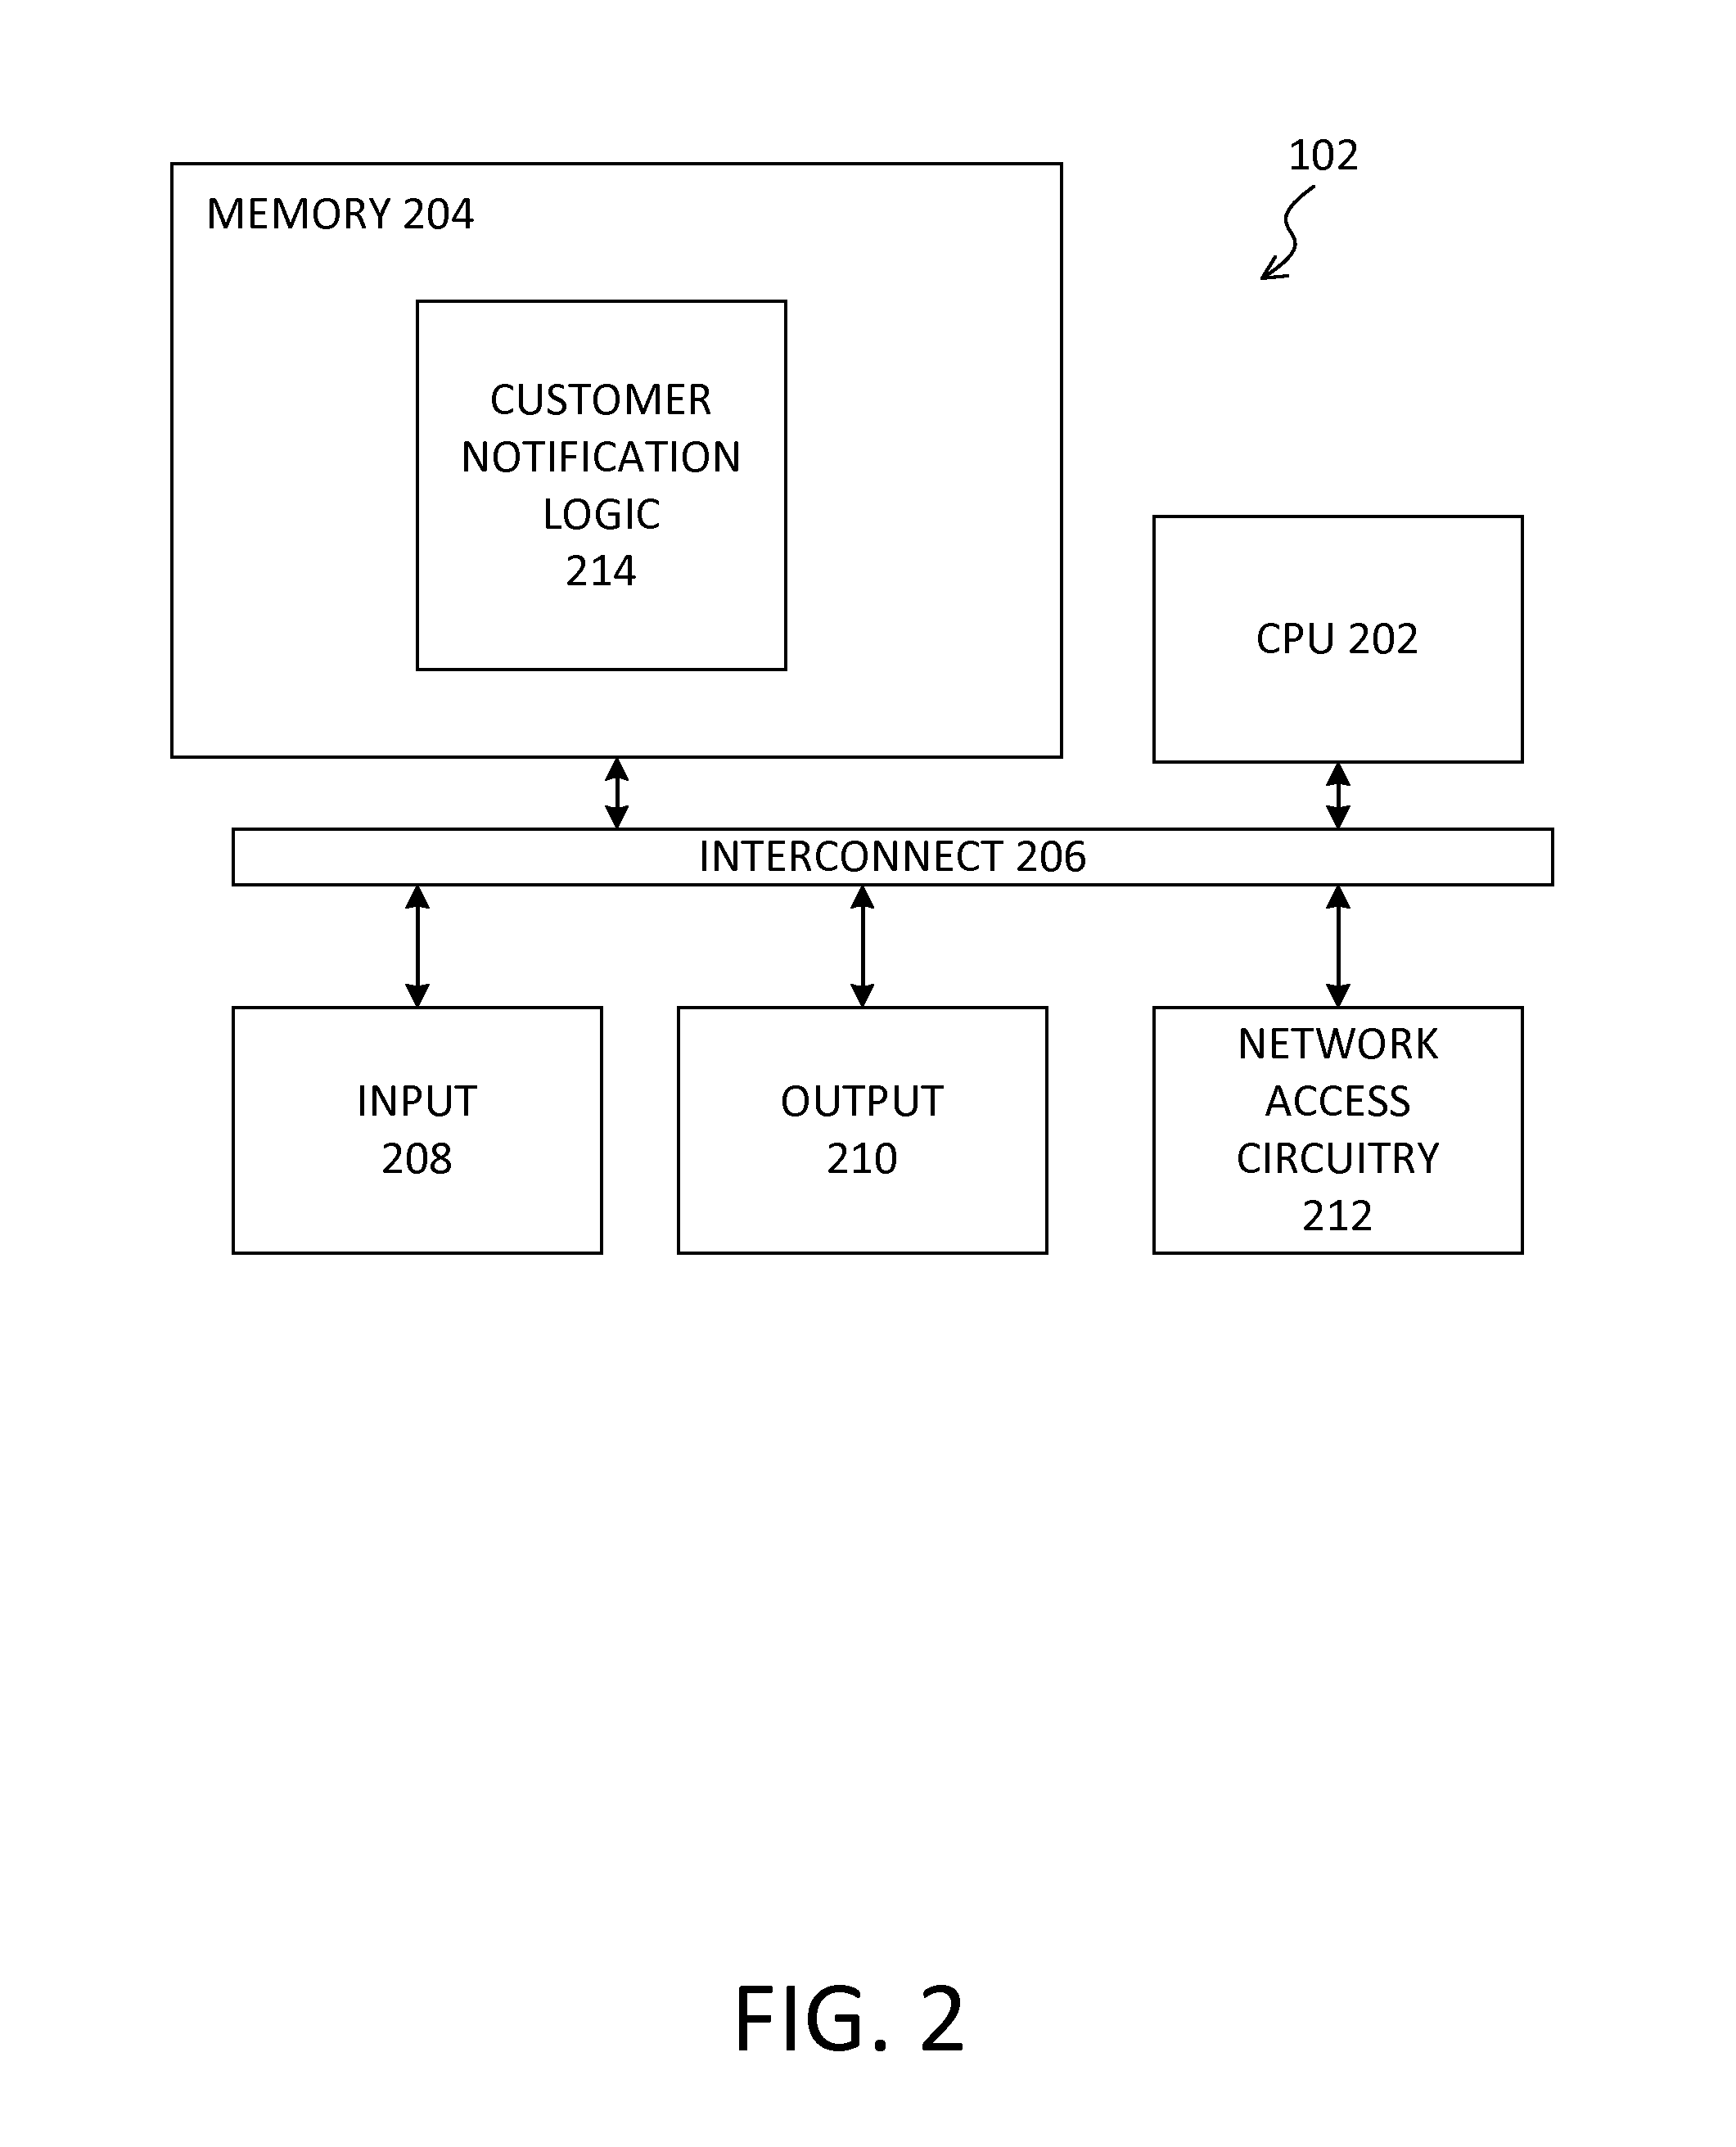 Method and system for authorizing remote access to customer account information